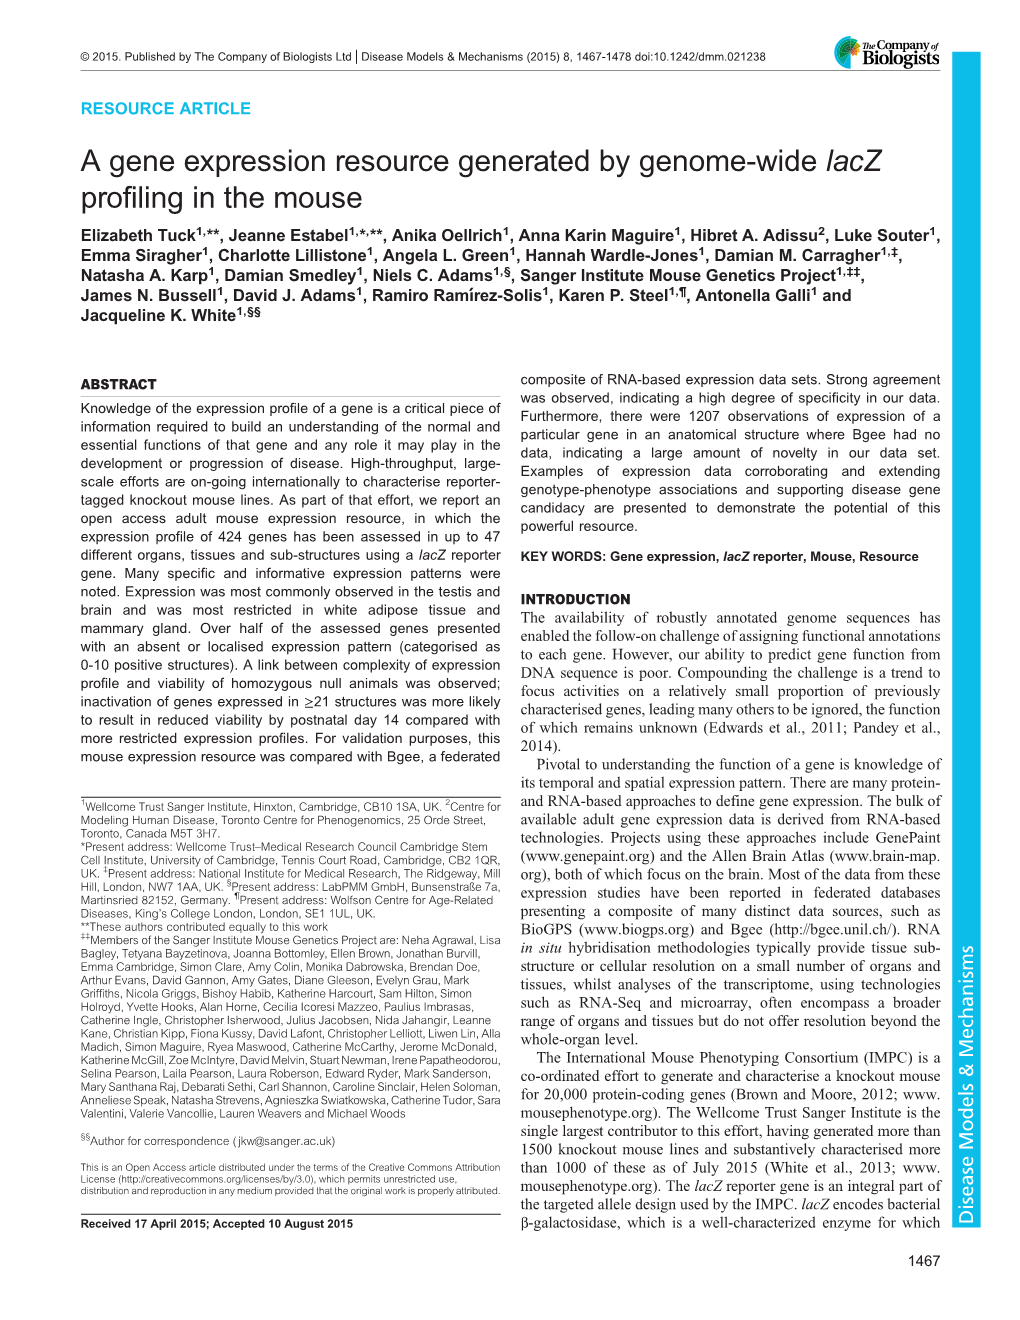 A Gene Expression Resource Generated by Genome-Wide Lacz